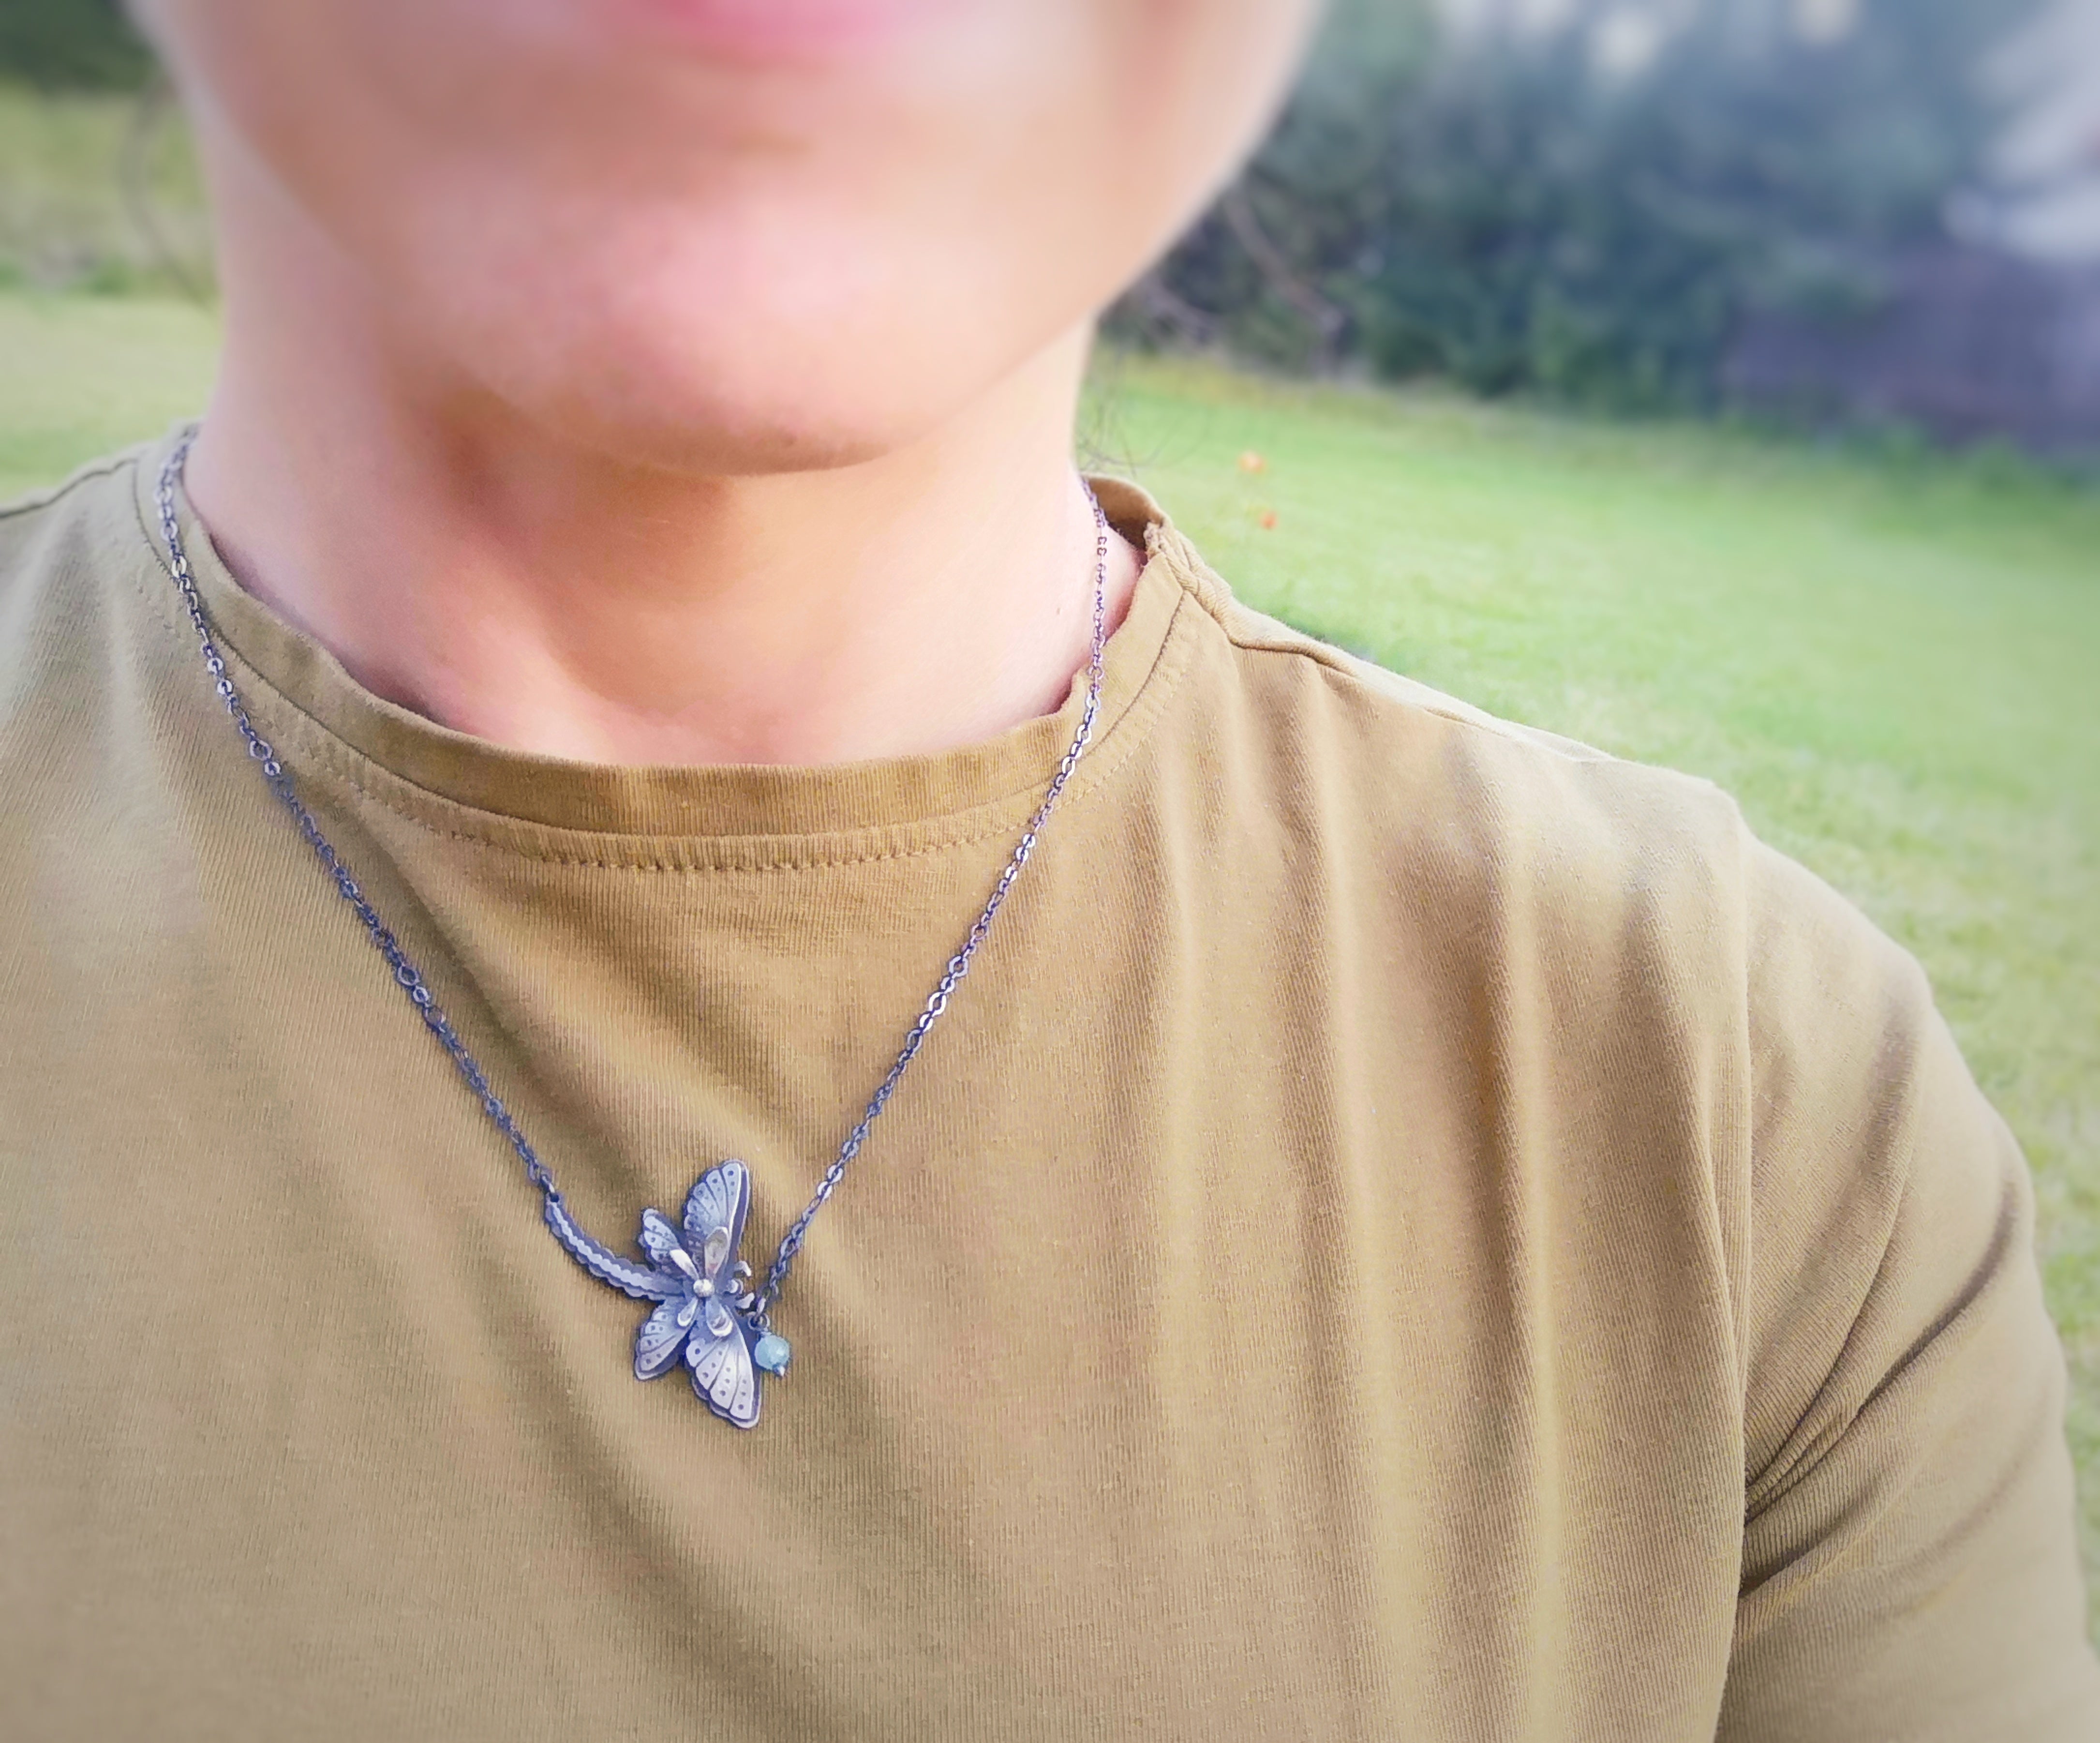 The Dragonfly Necklace